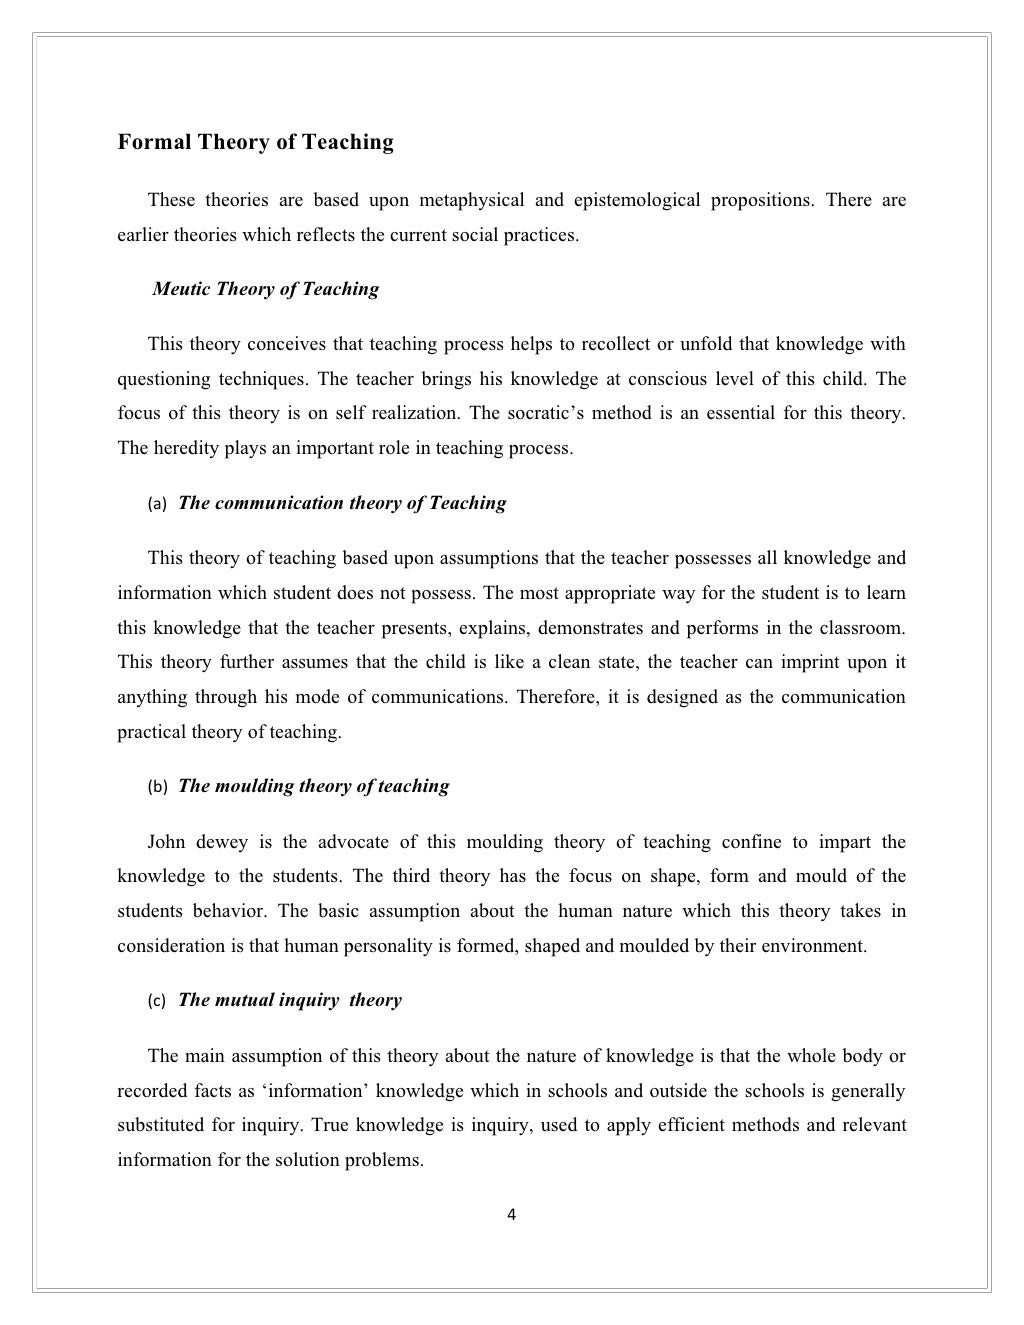 theory of teaching essay examples